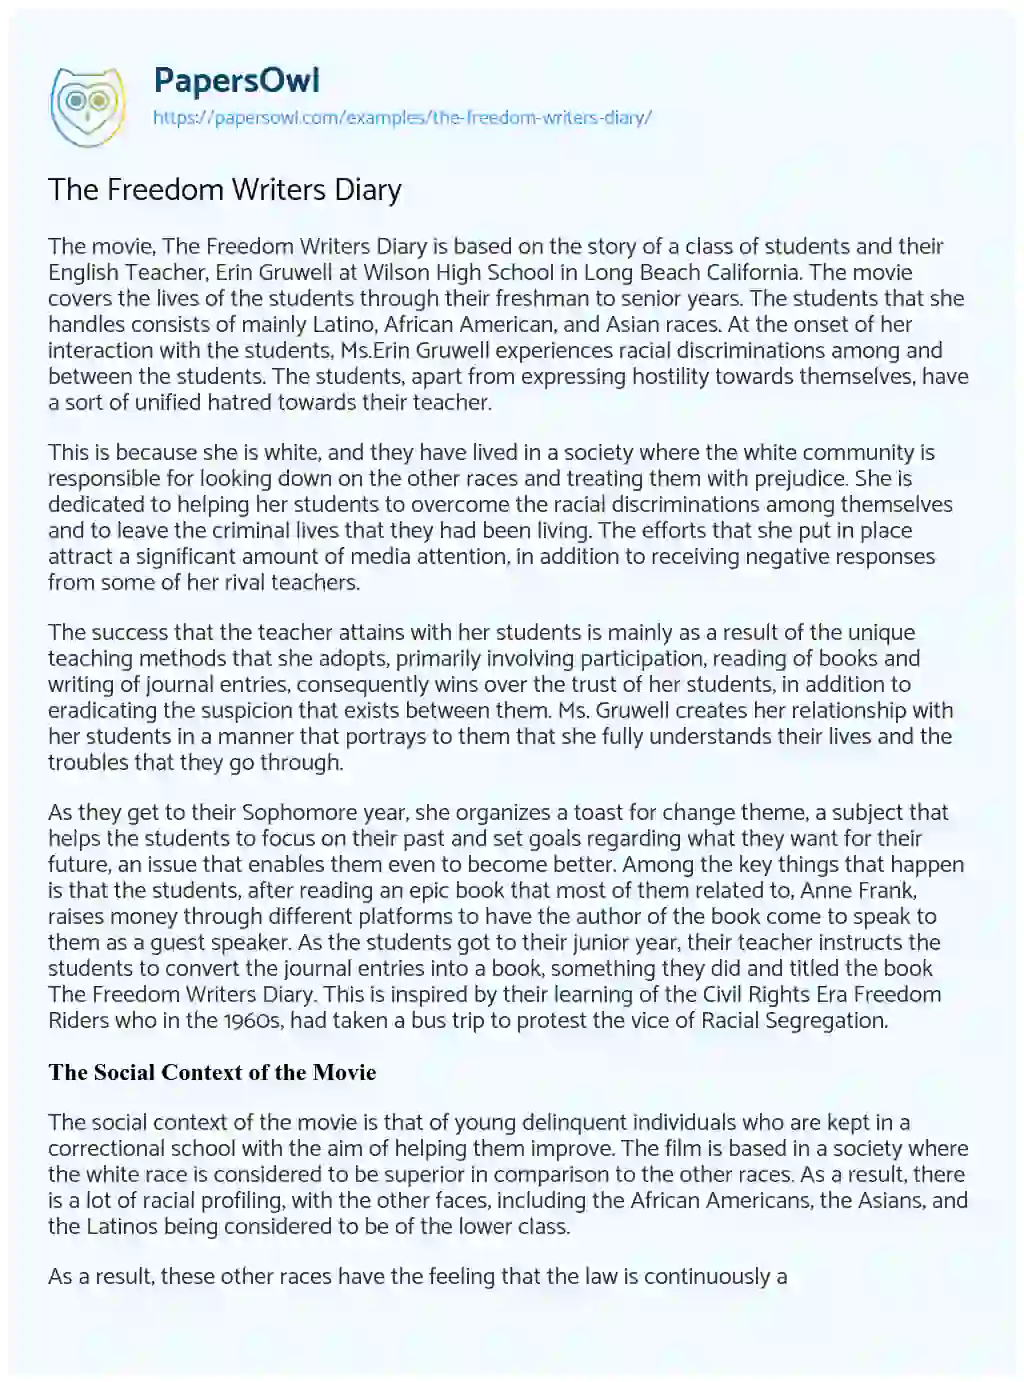 Essay on The Freedom Writers Diary